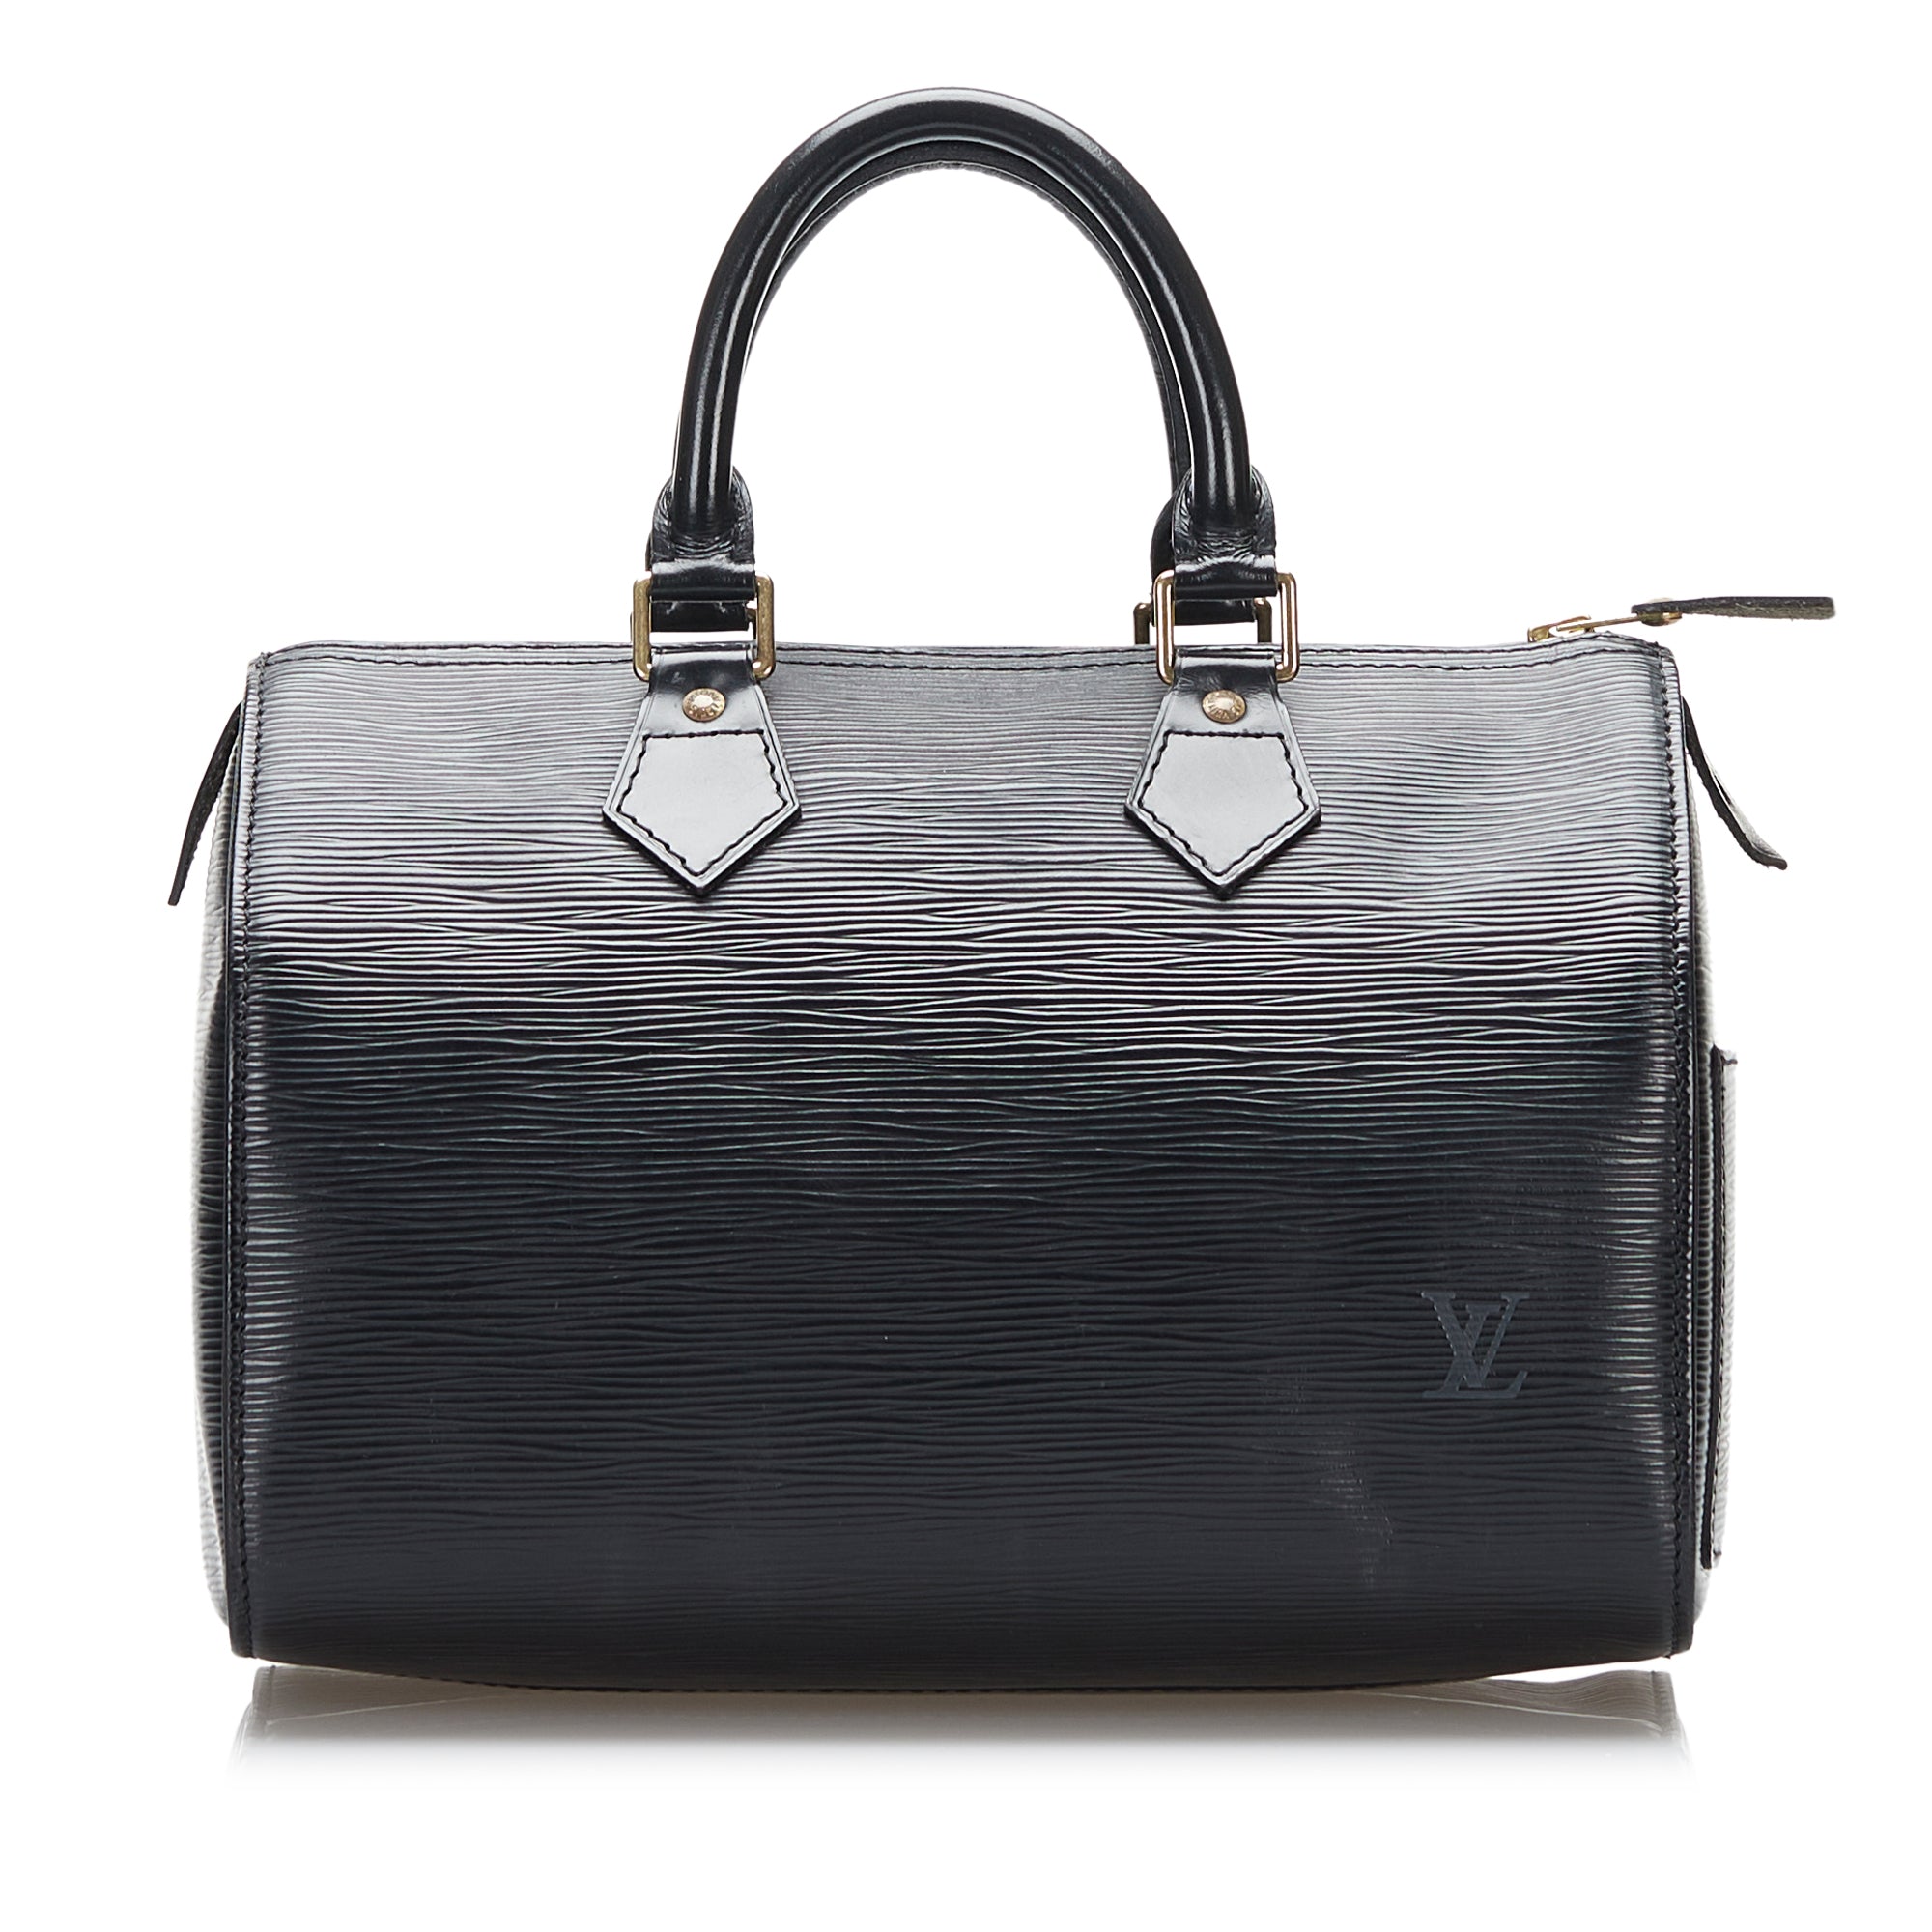 Bag Battle: Which one is better? Louis Vuitton Speedy 25 vs MCM